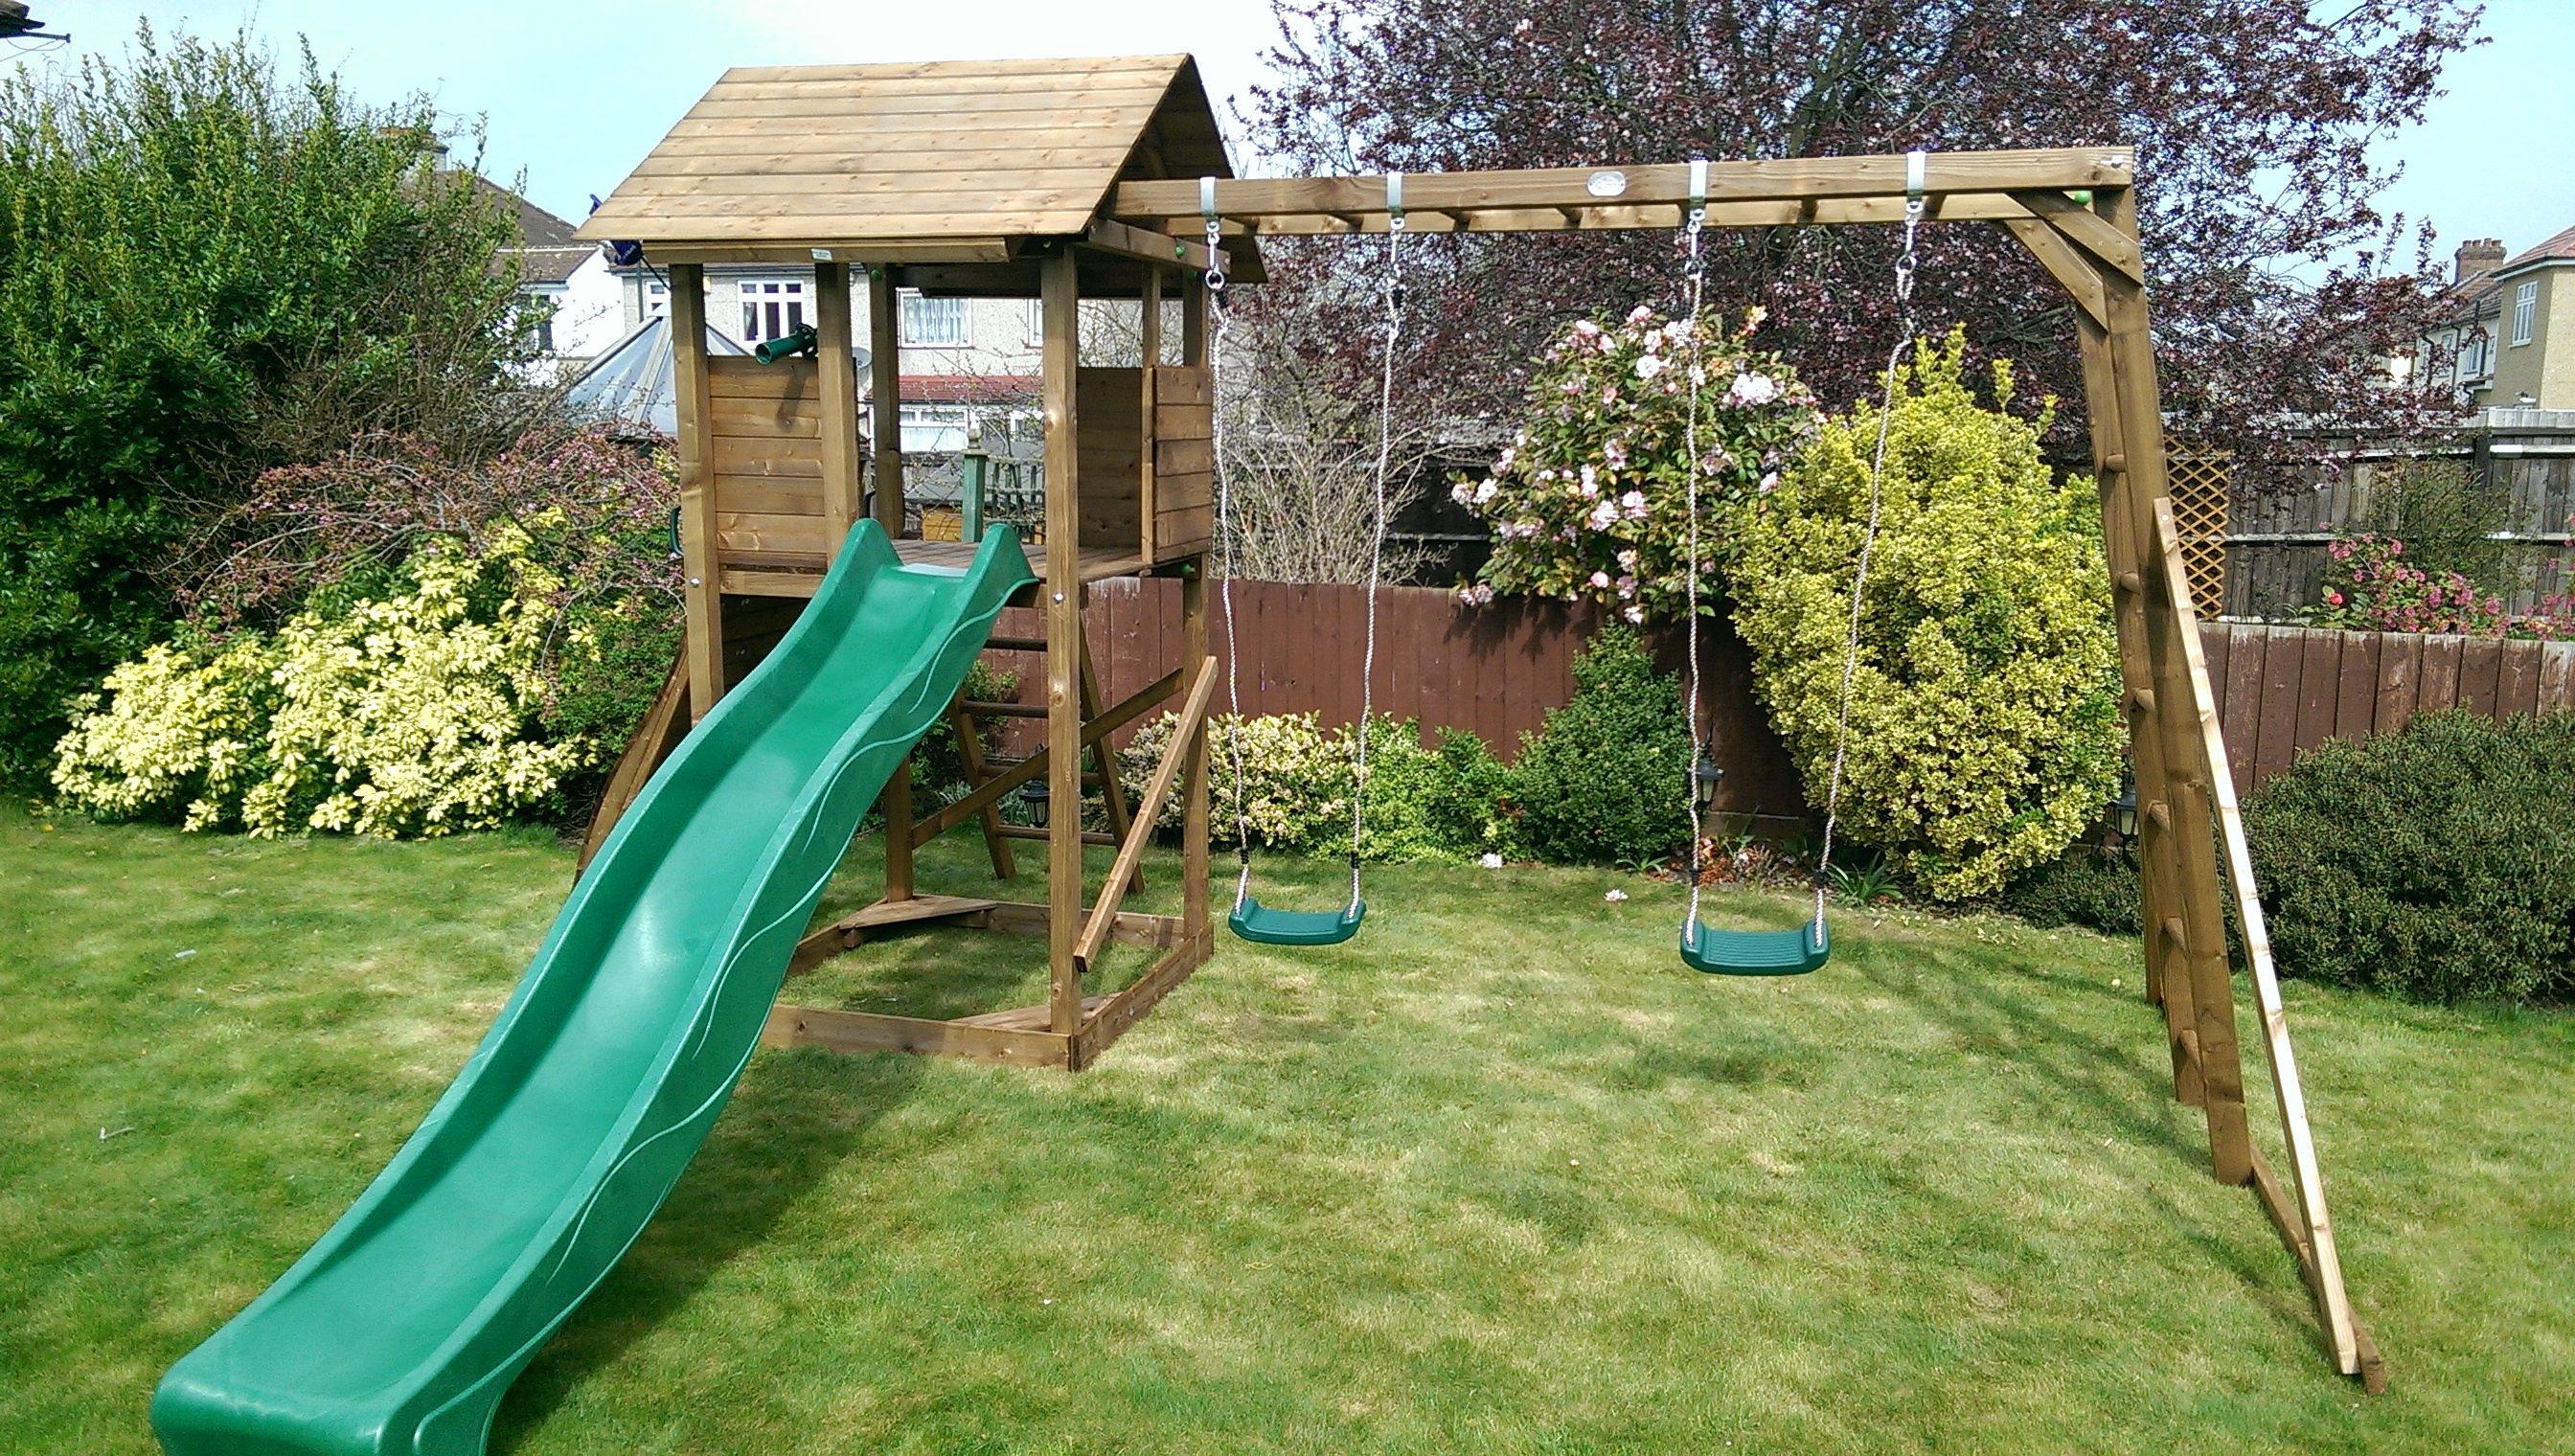 The Dunster House MaxiFort Frontier Climbing Frame